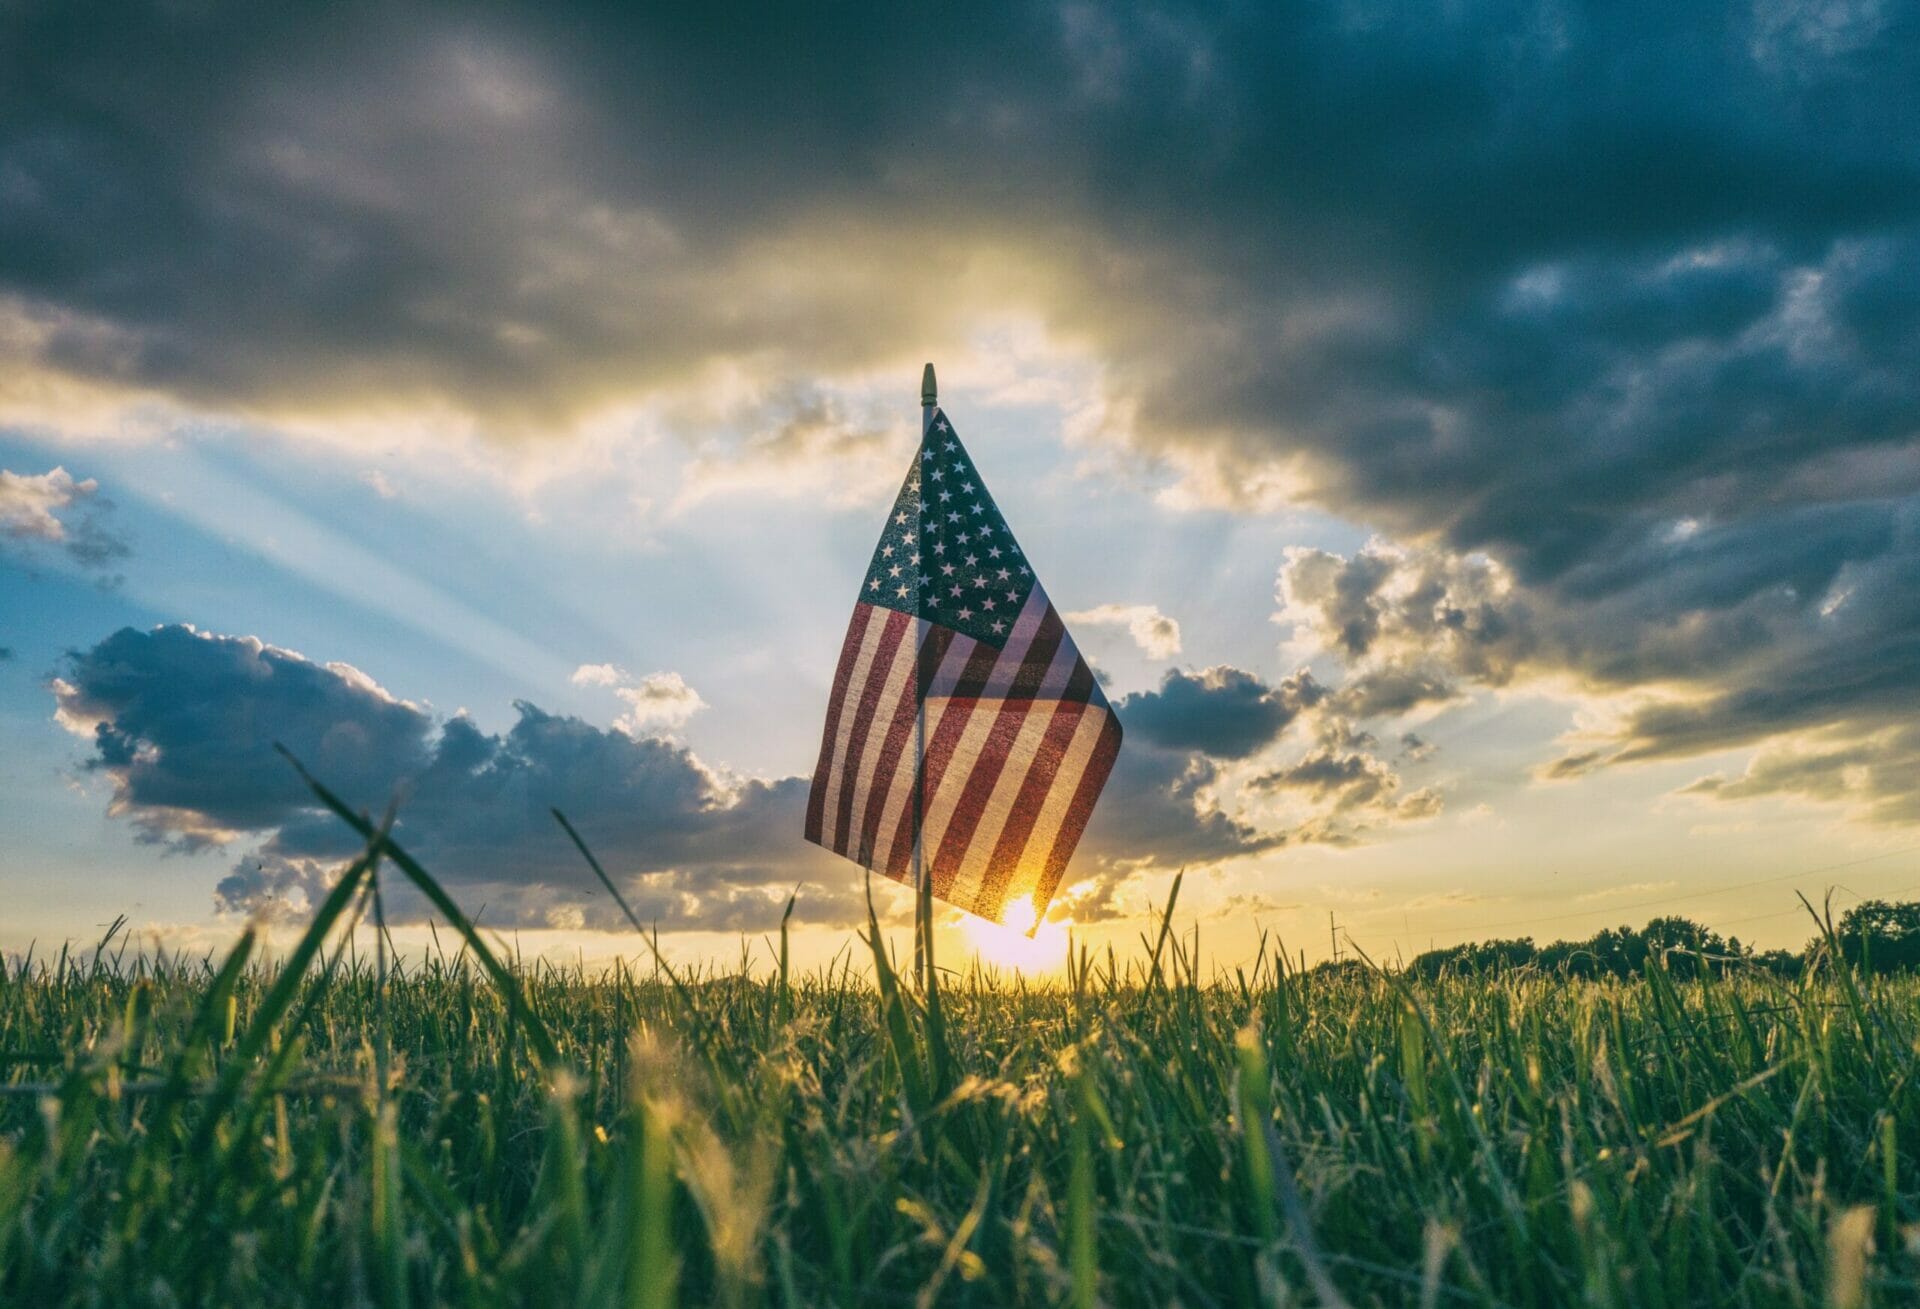 Tiny American flag stuck in the grass - A Patriot’s View on Independence Day